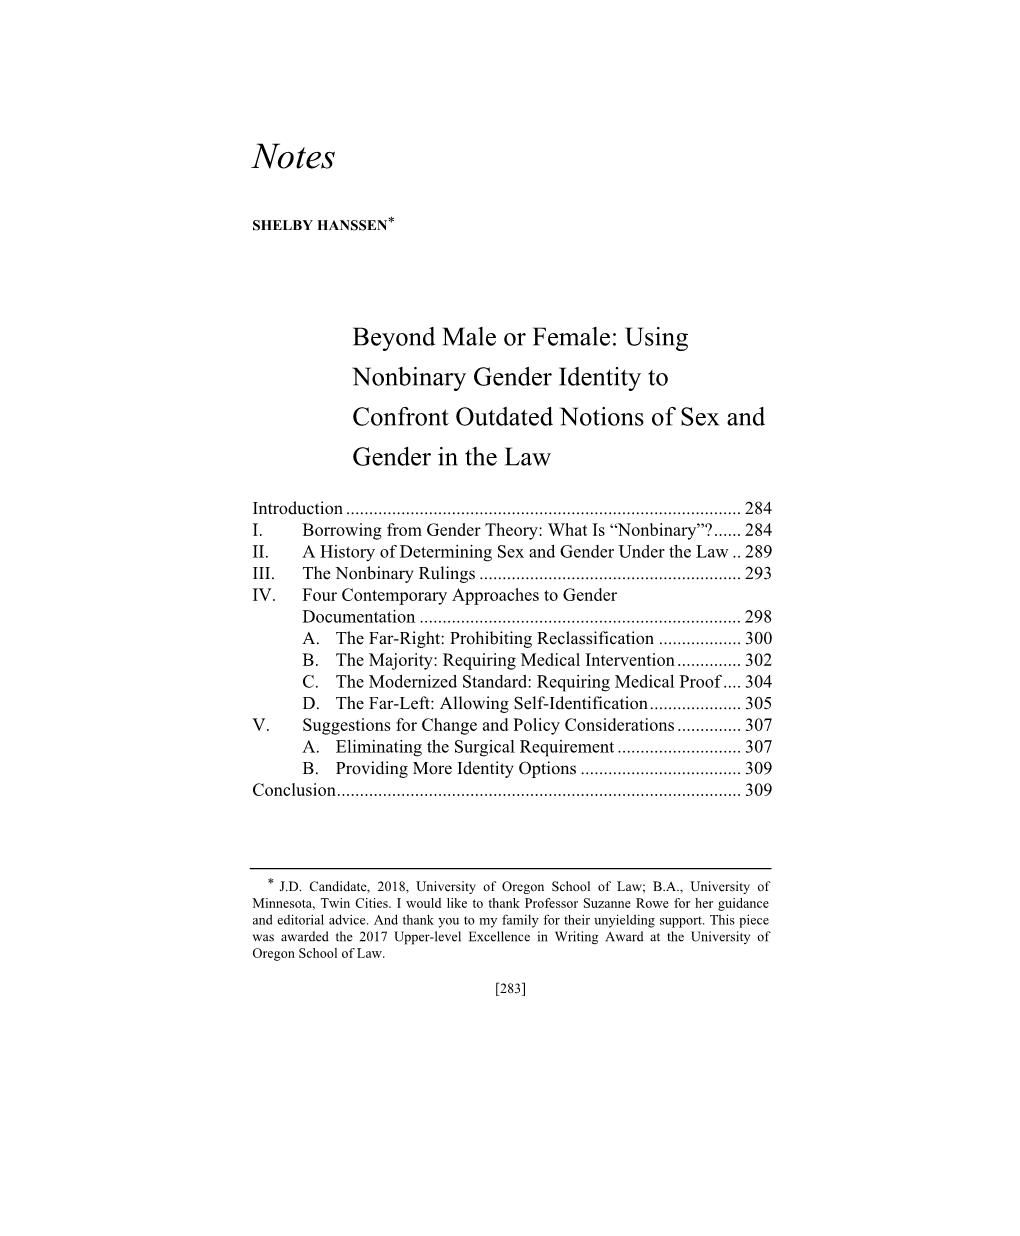 Beyond Male Or Female: Using Nonbinary Gender Identity to Confront Outdated Notions of Sex and Gender in the Law